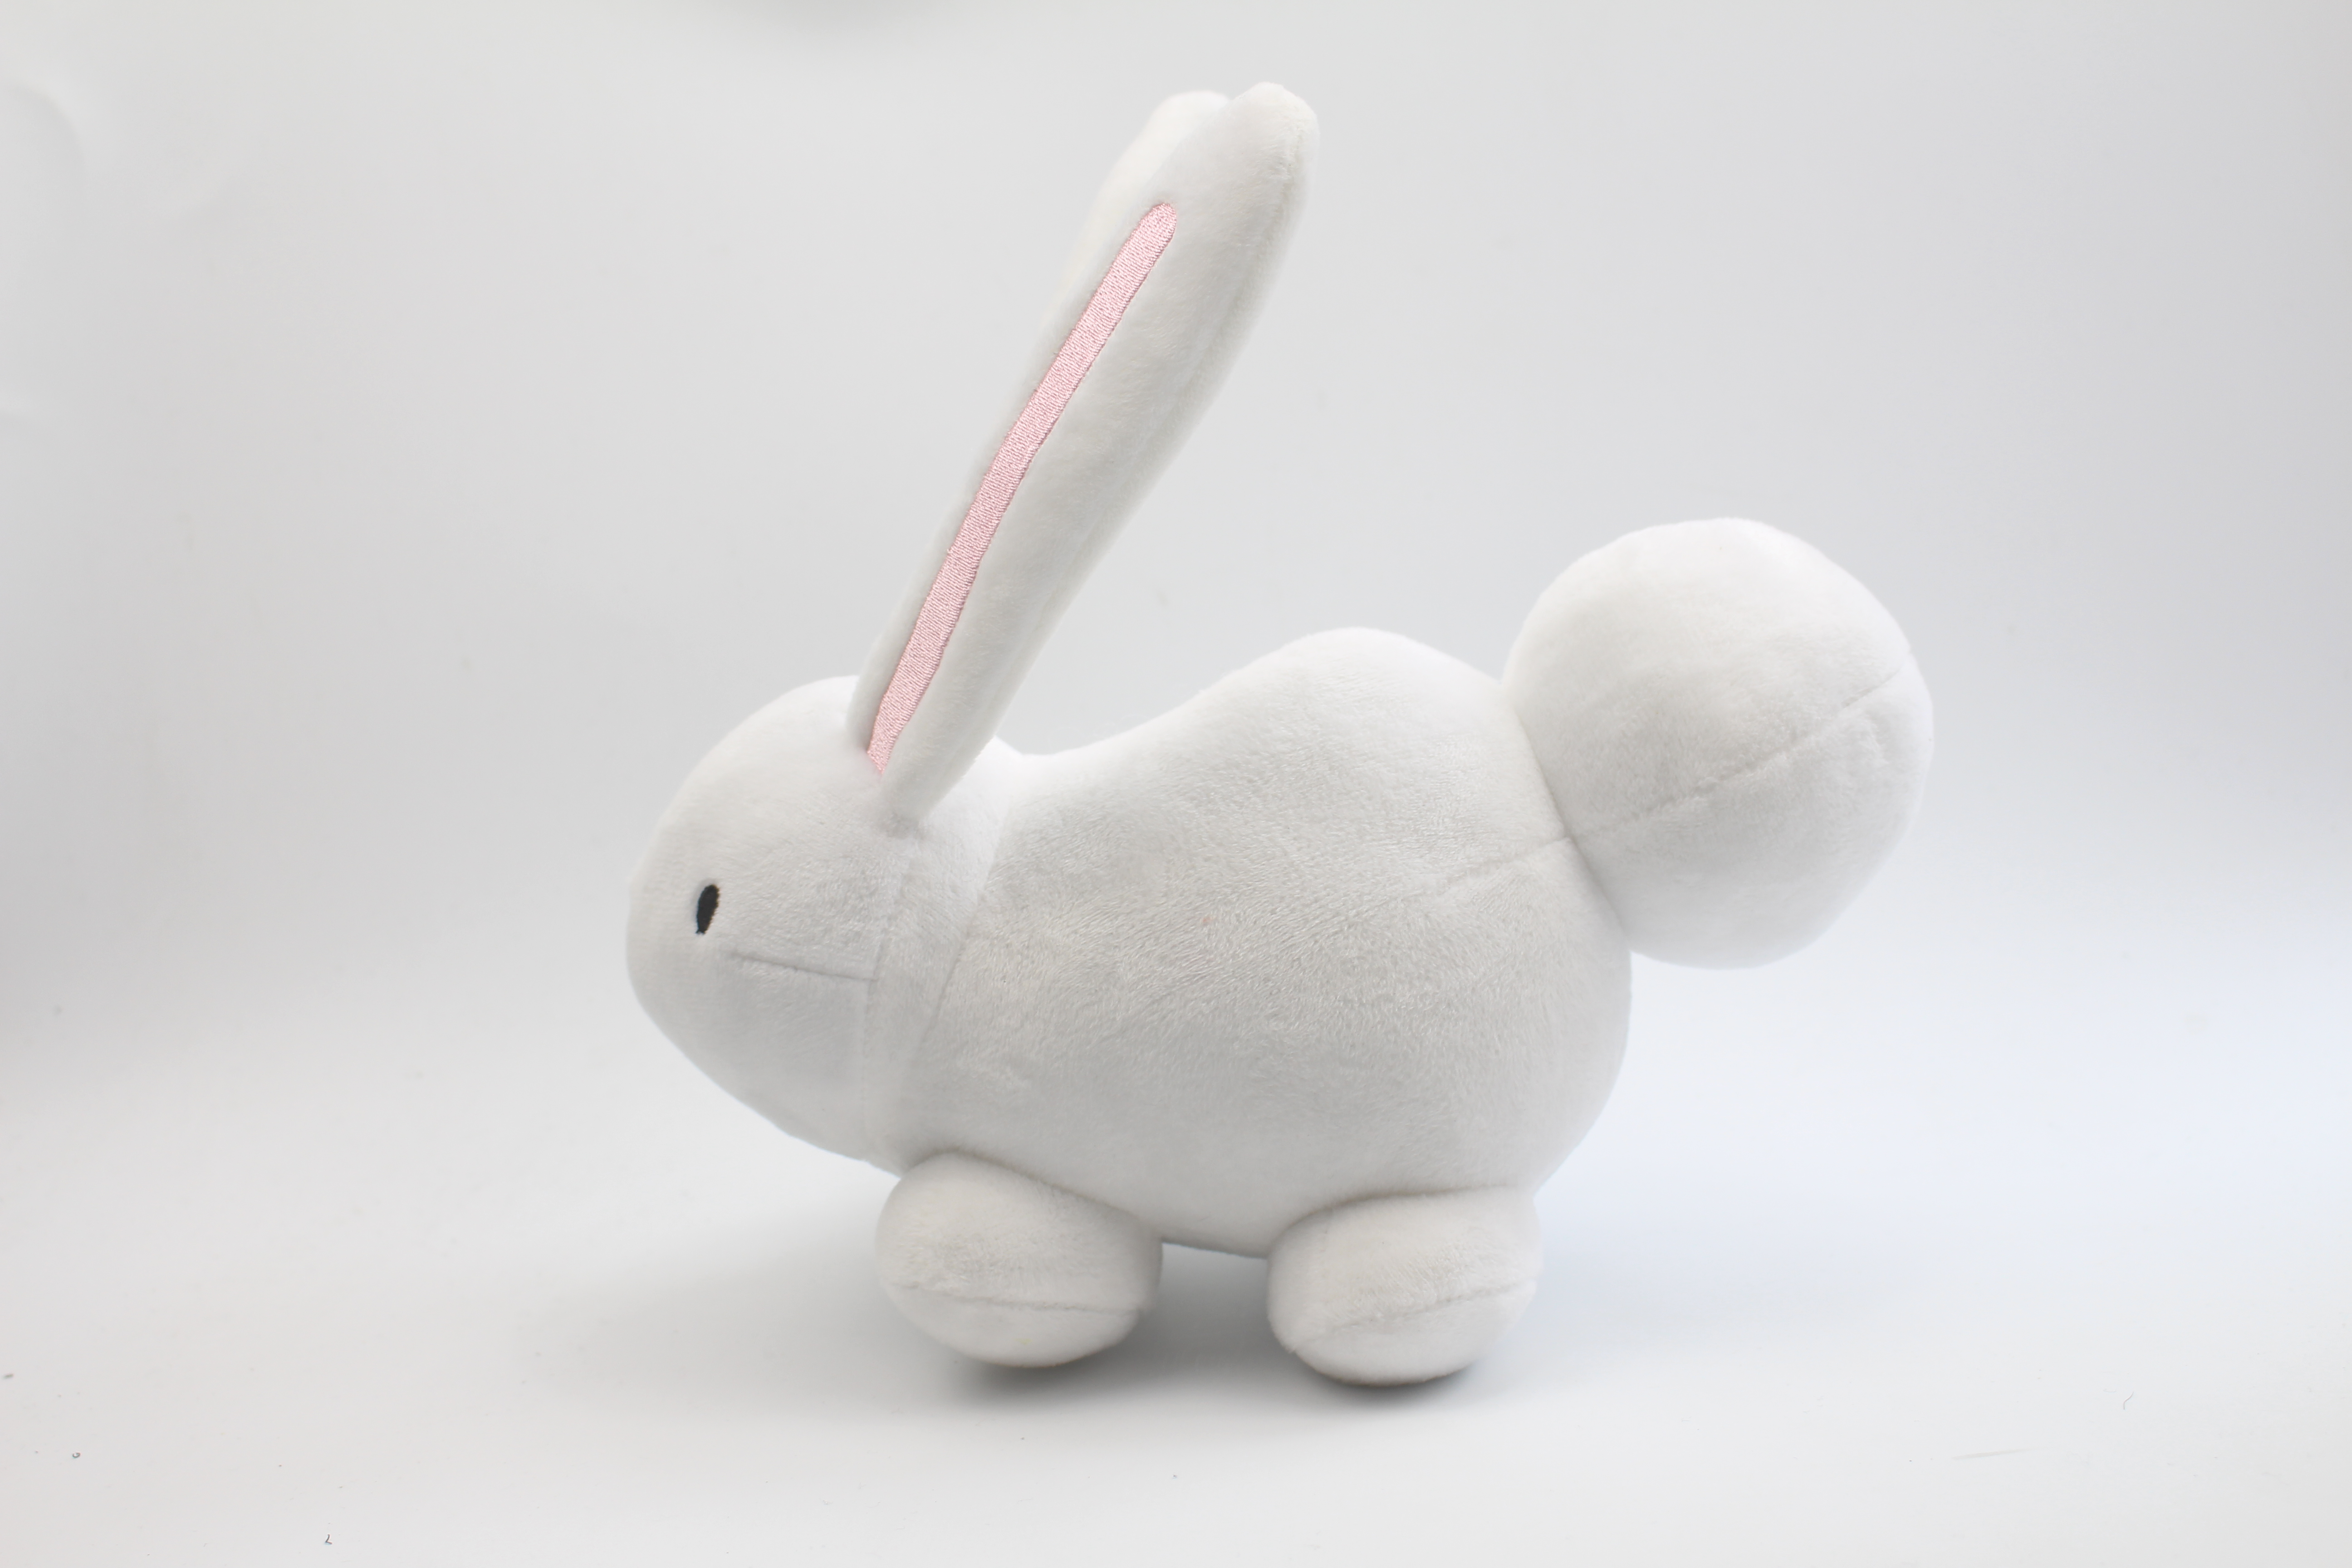 Dimensions of the bunny plush toy